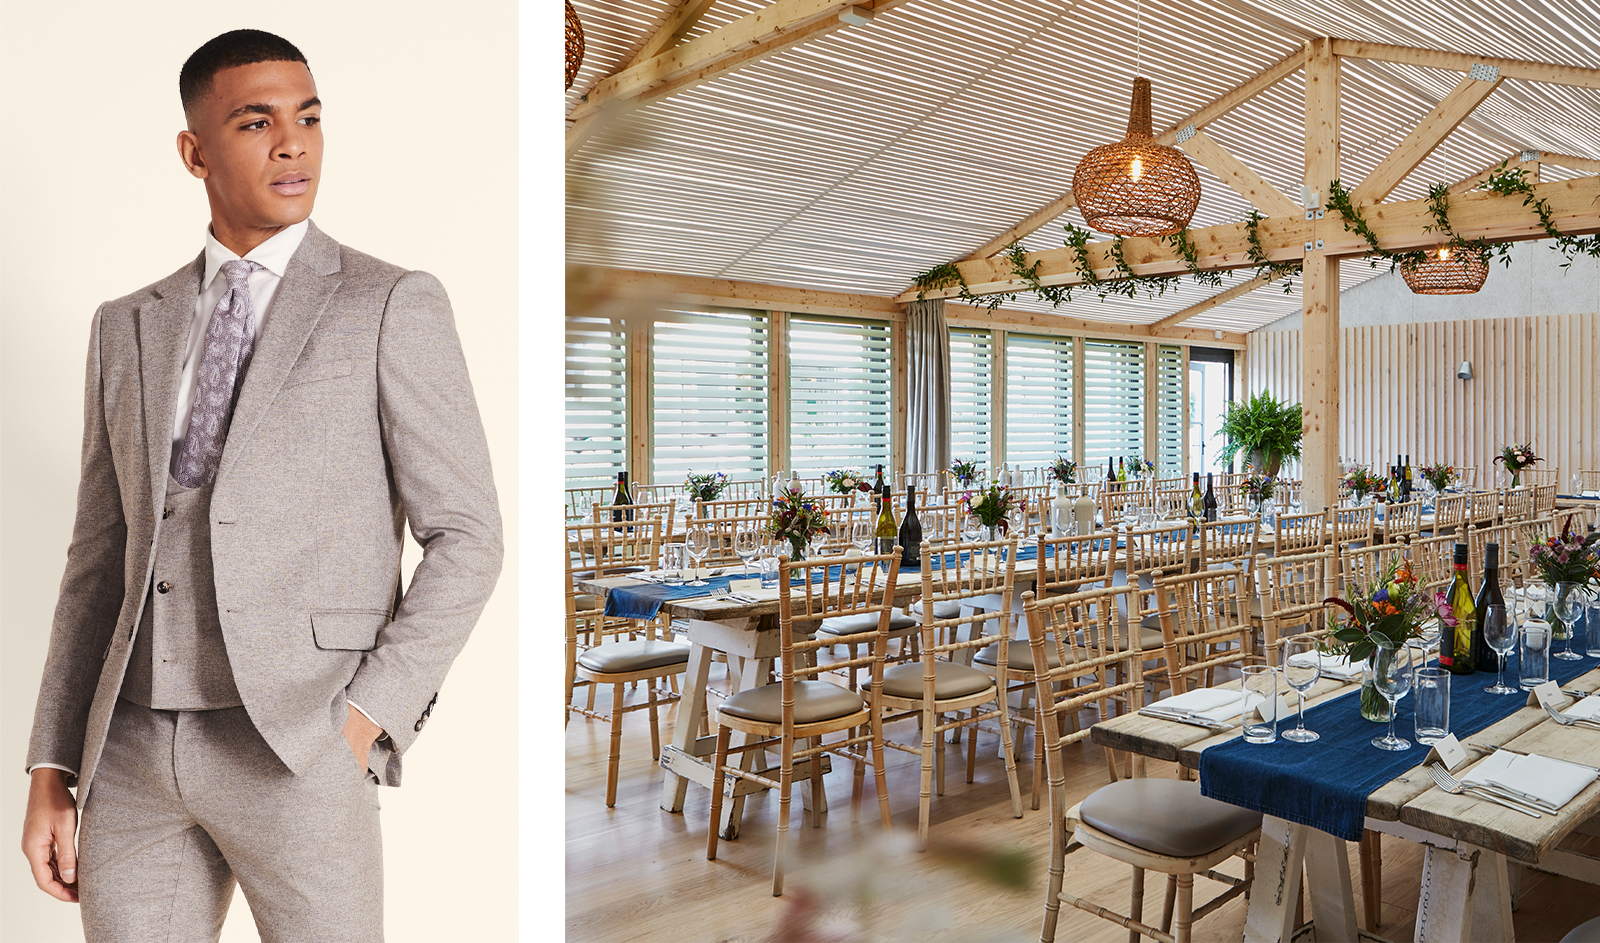 coastal venue and wedding suit by moss bros